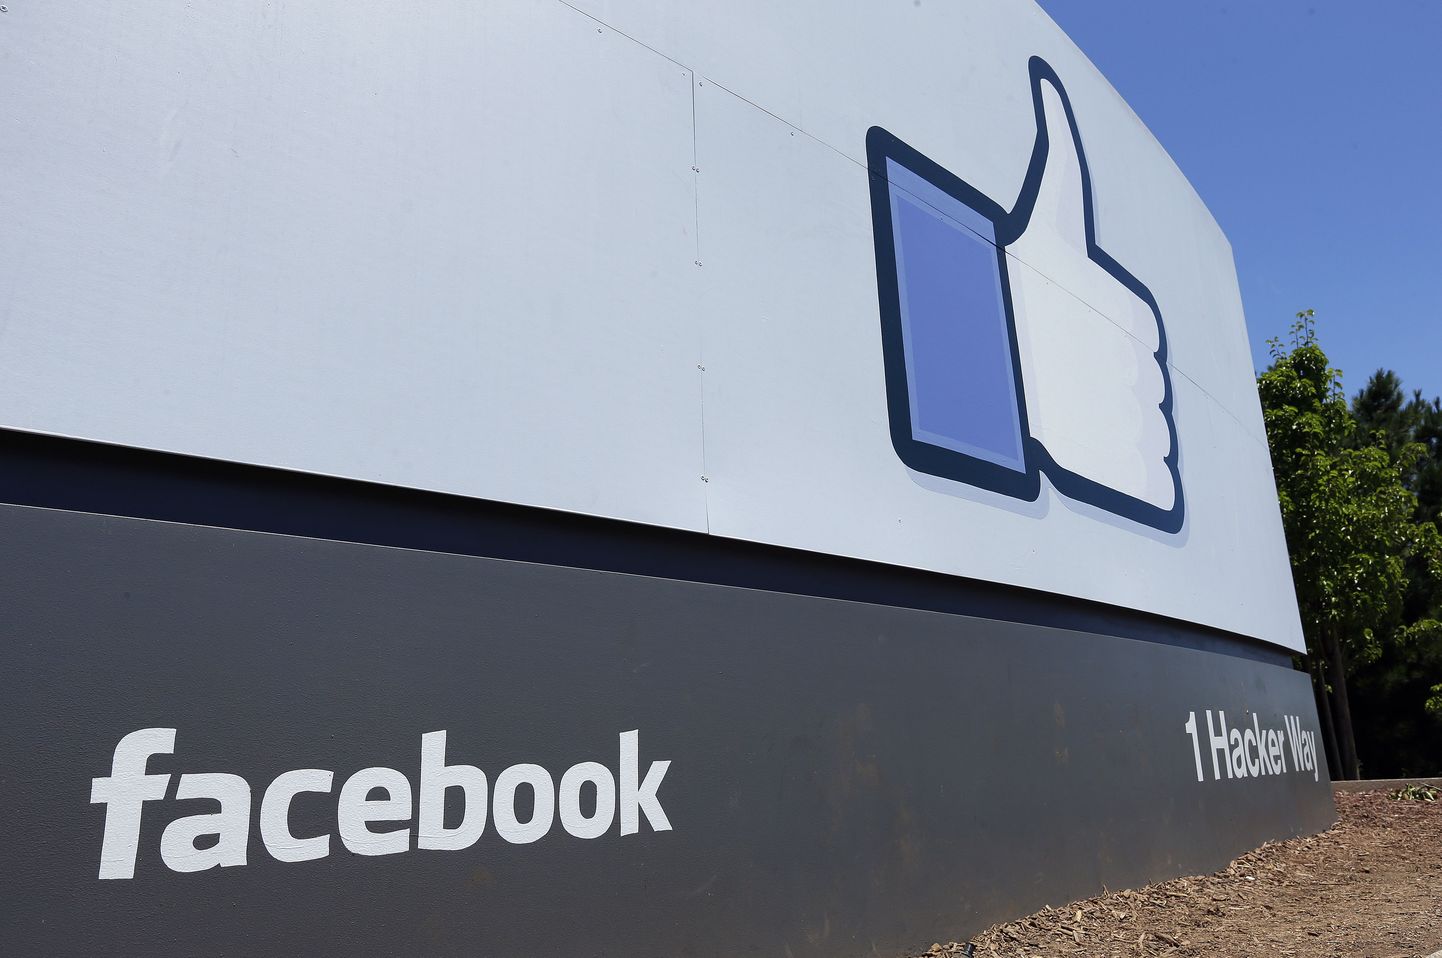 This Tuesday, July 16, 2013, photo, shows a sign seen at Facebook headquarters in Menlo Park, Calif. Facebook reports quarterly earnings on Wednesday, July 24, 2013. (AP Photo/Ben Margot) / SCANPIX Code: 436